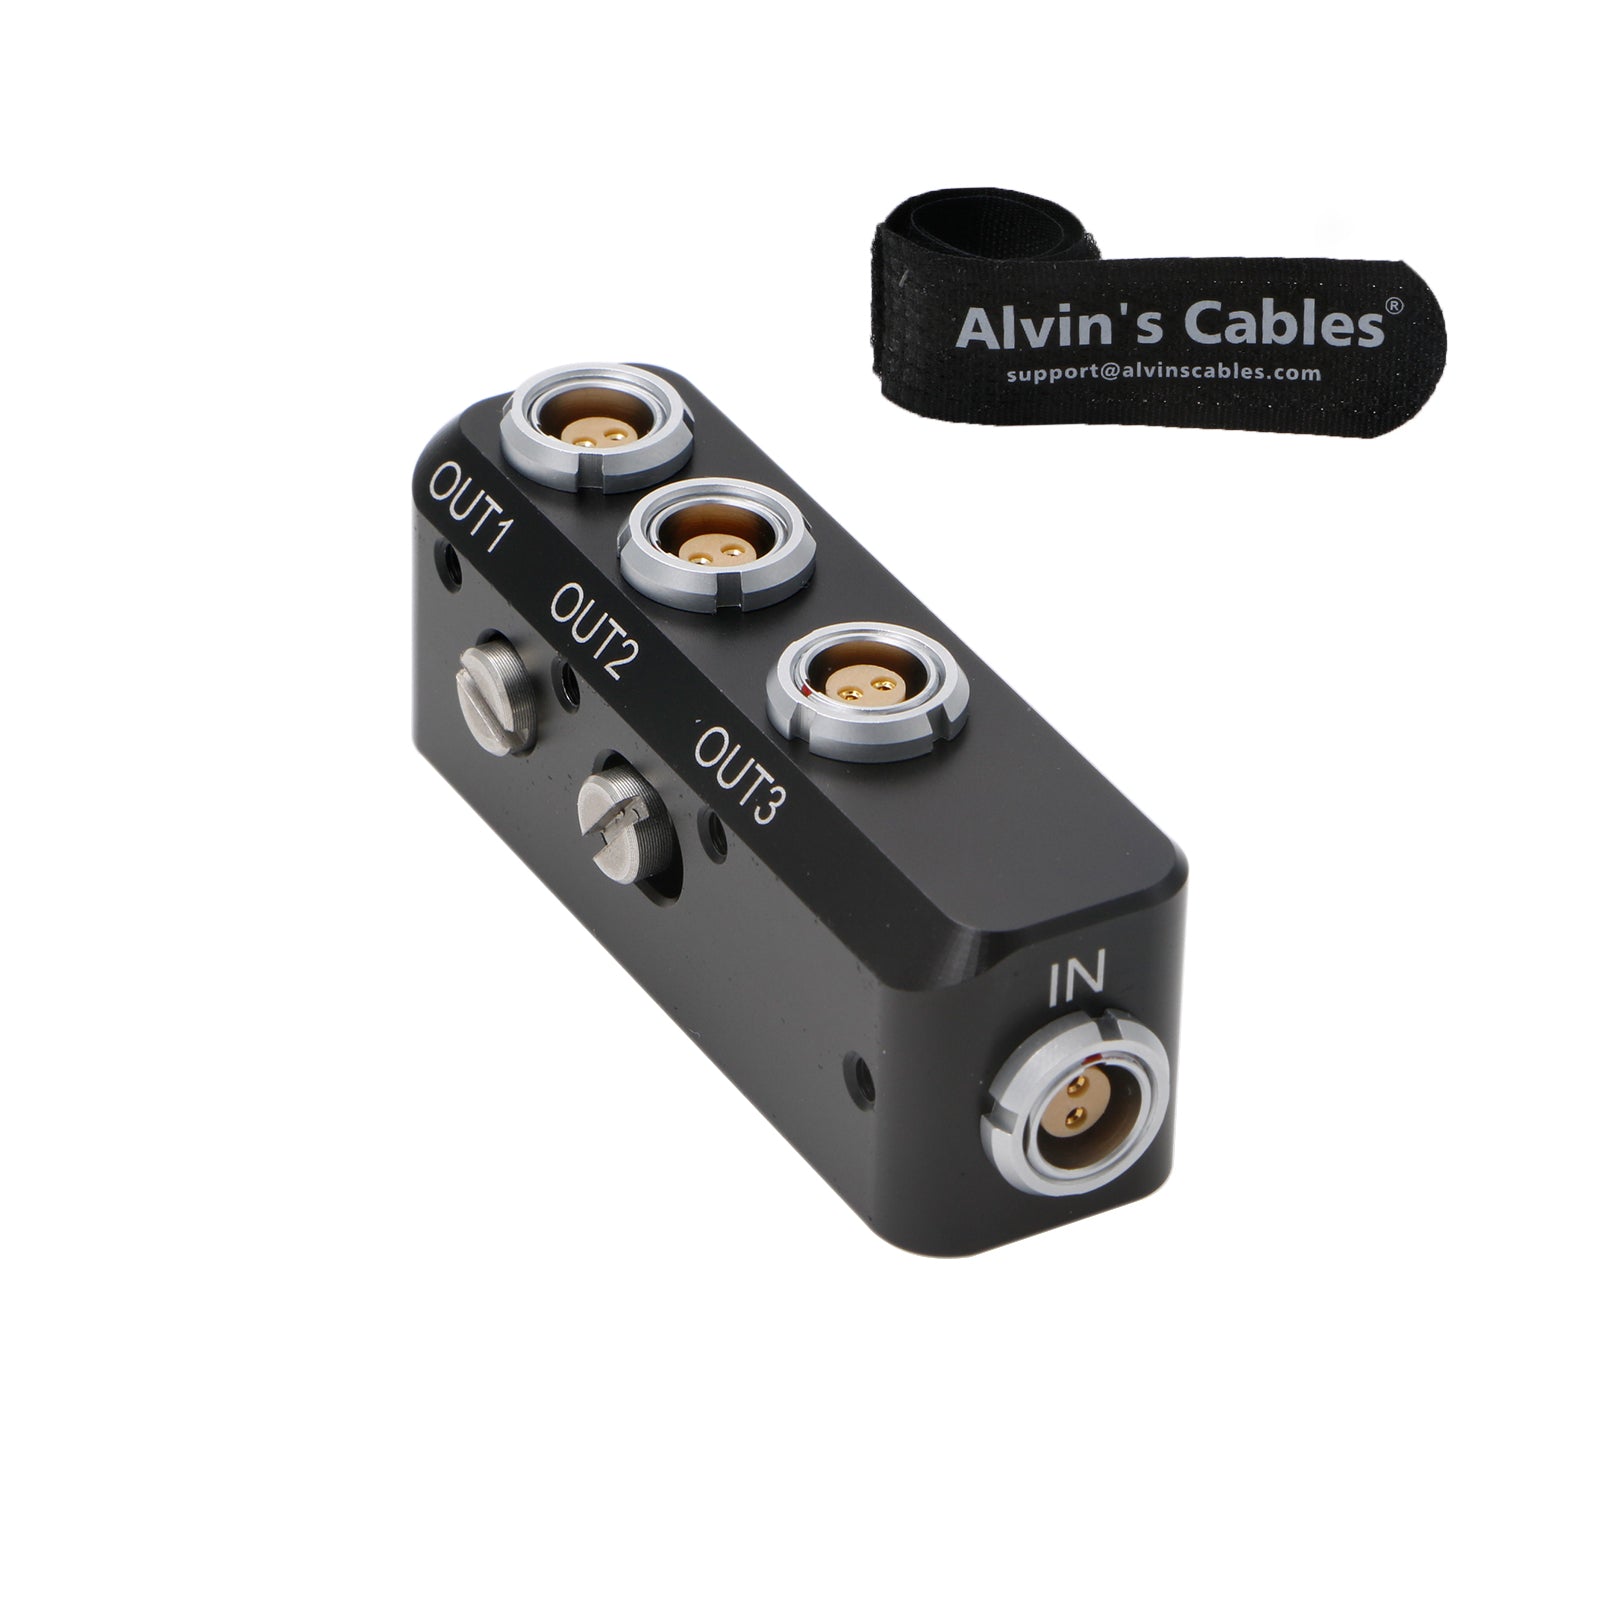 Alvin's Cables 4X 2-Pin In/Out 0B 302 Mini Splitter Cable Upgraded 2-Pin-Female Input to 3X 2Pin Output Power-Supply-Distributor-Box for Arri Alexa|Steadicam|Teradek Bond|SmallHD with Adjustable-Screw